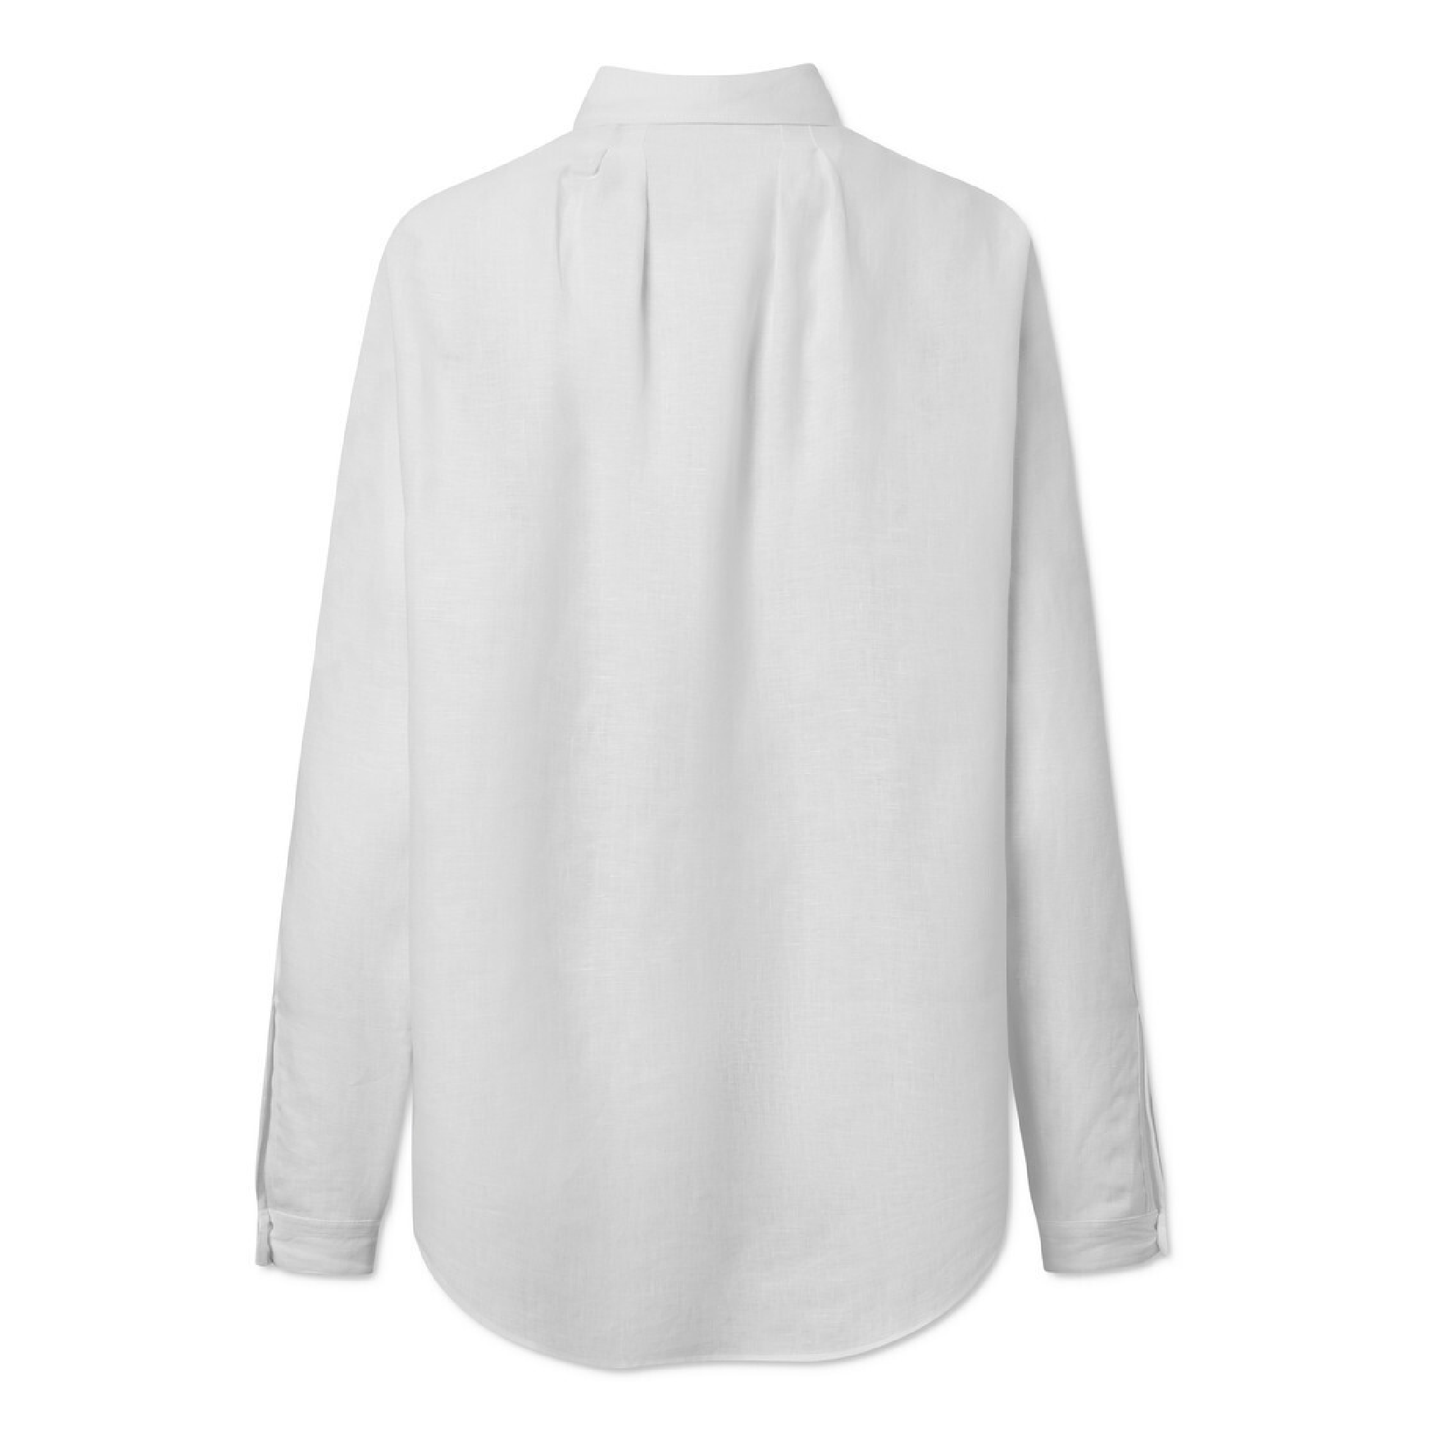 Shelby Shirt Washed Linen, White